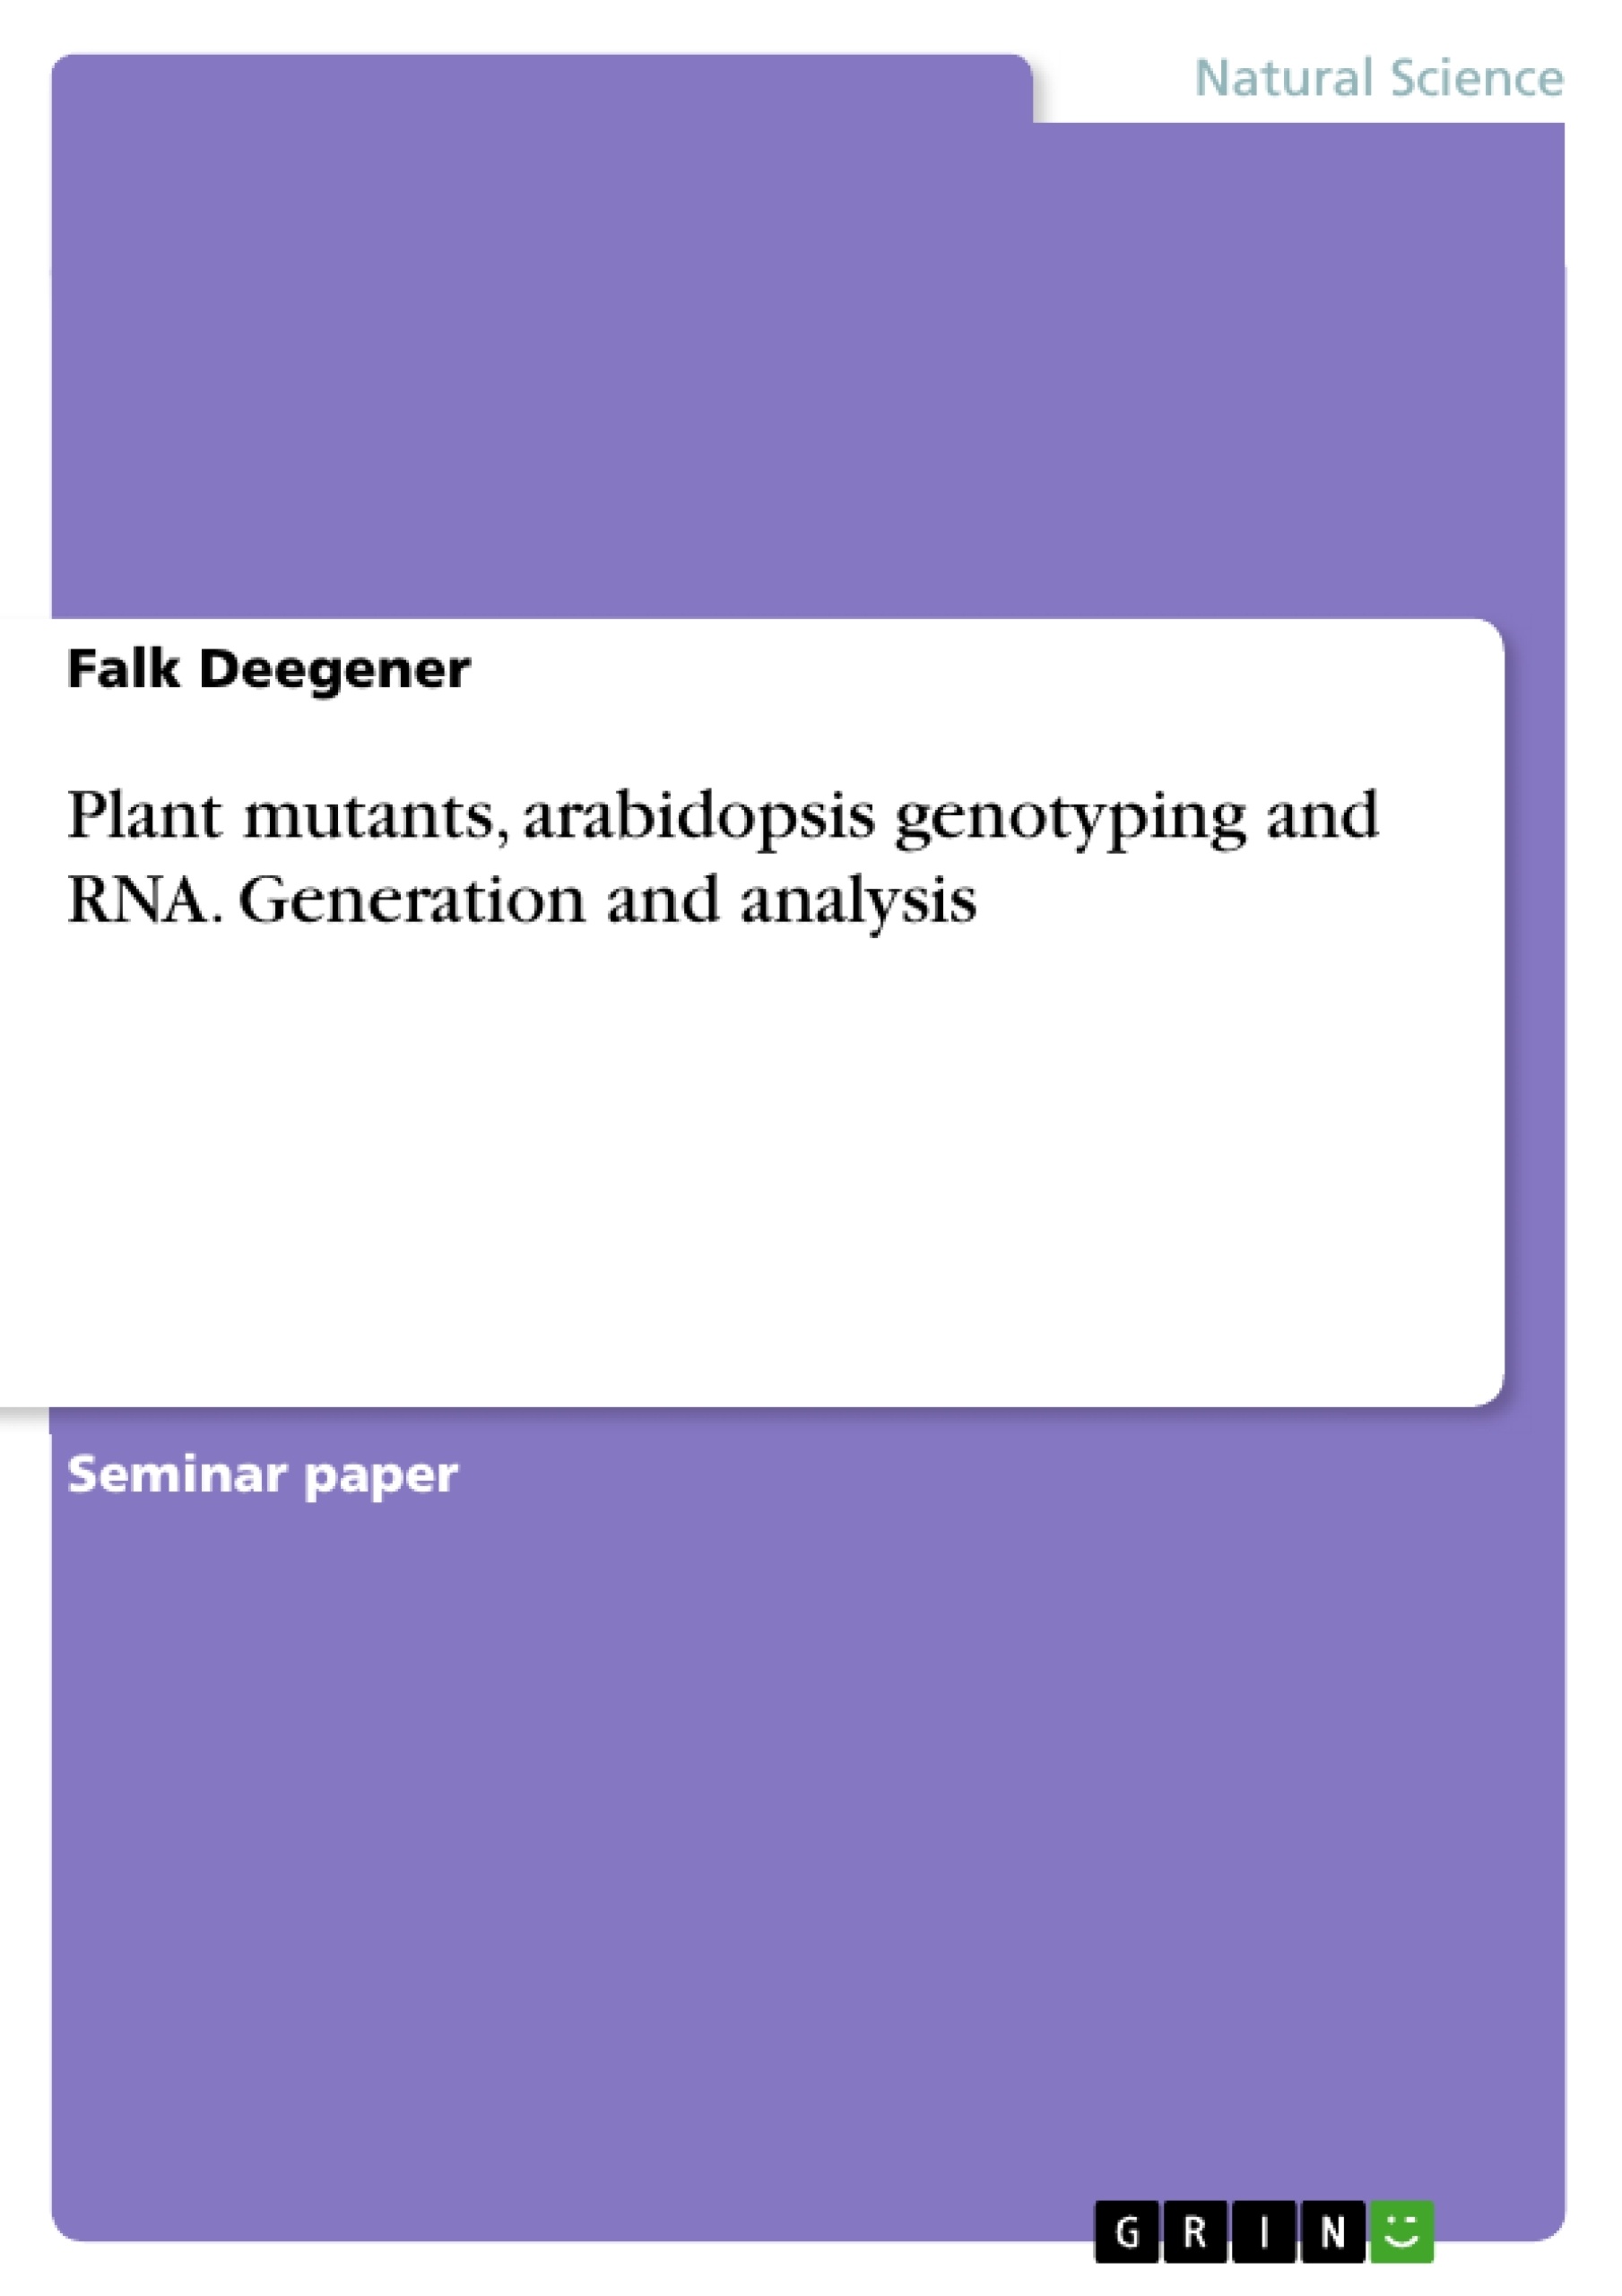 Title: Plant mutants, arabidopsis genotyping and RNA. Generation and analysis